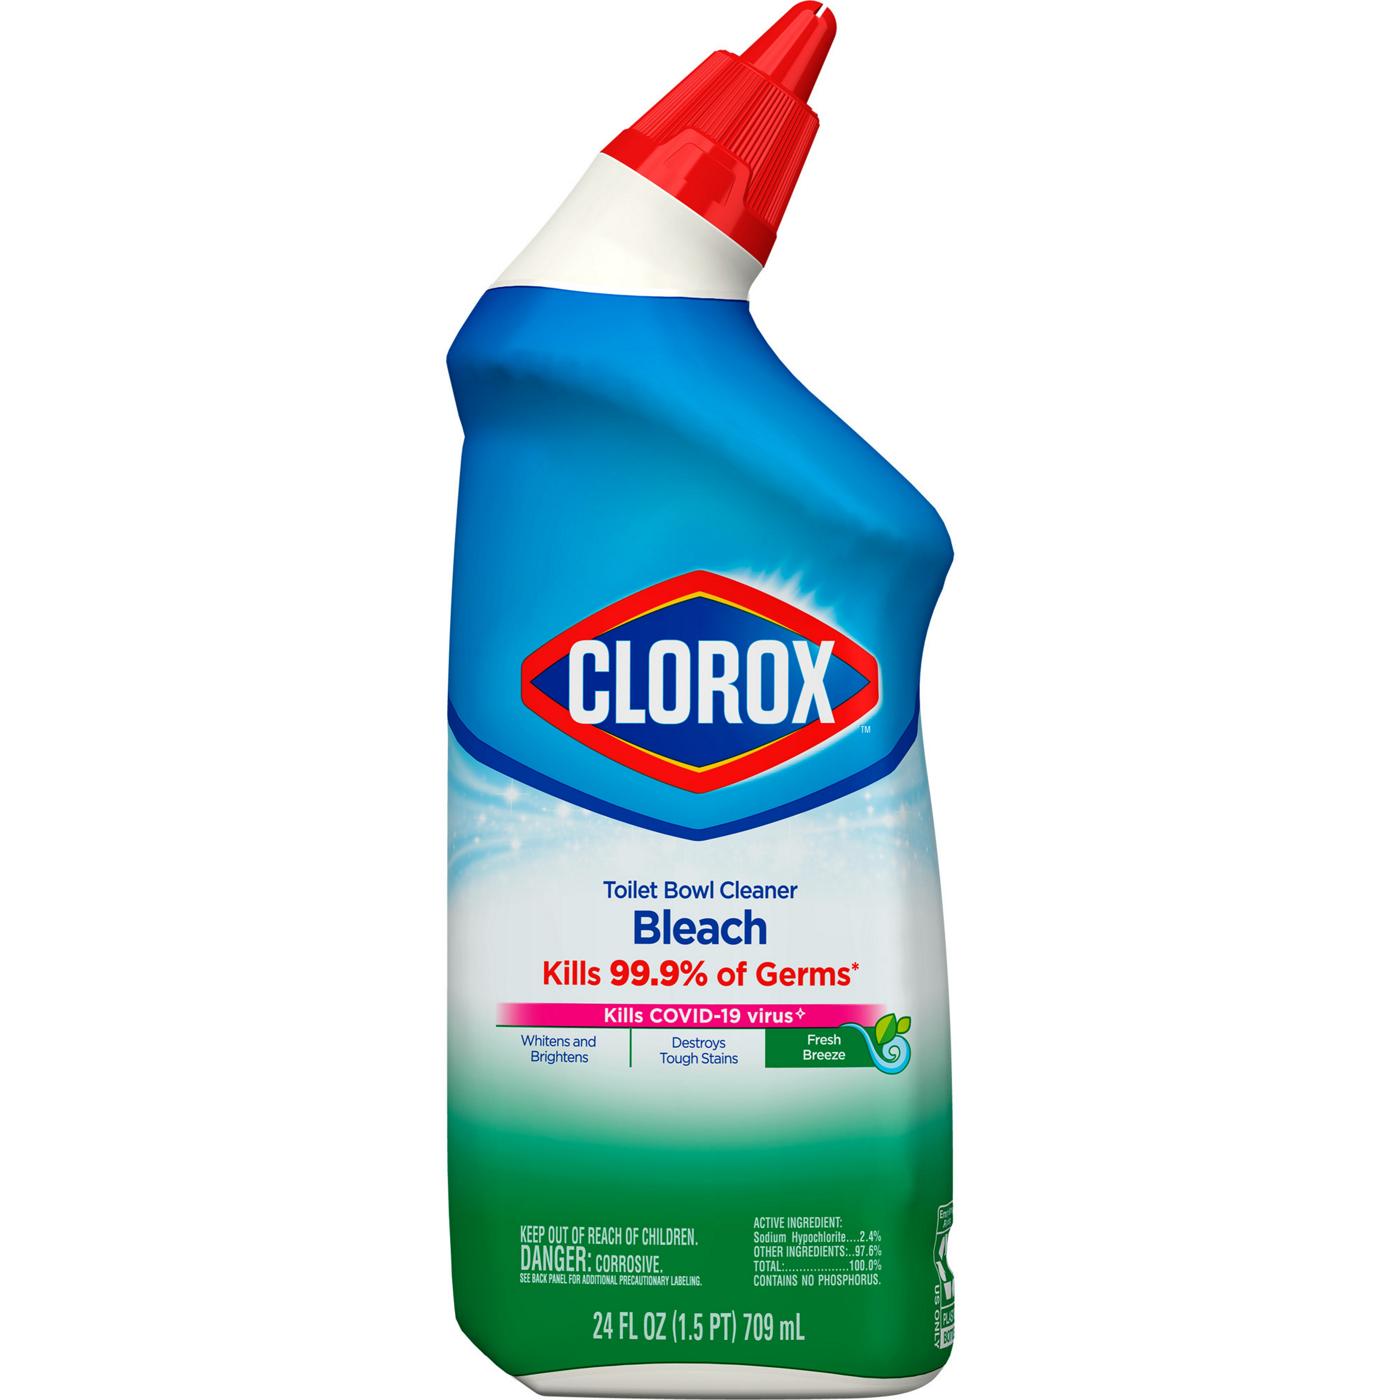 Clorox Fresh Toilet Bowl Cleaner with Bleach; image 1 of 4